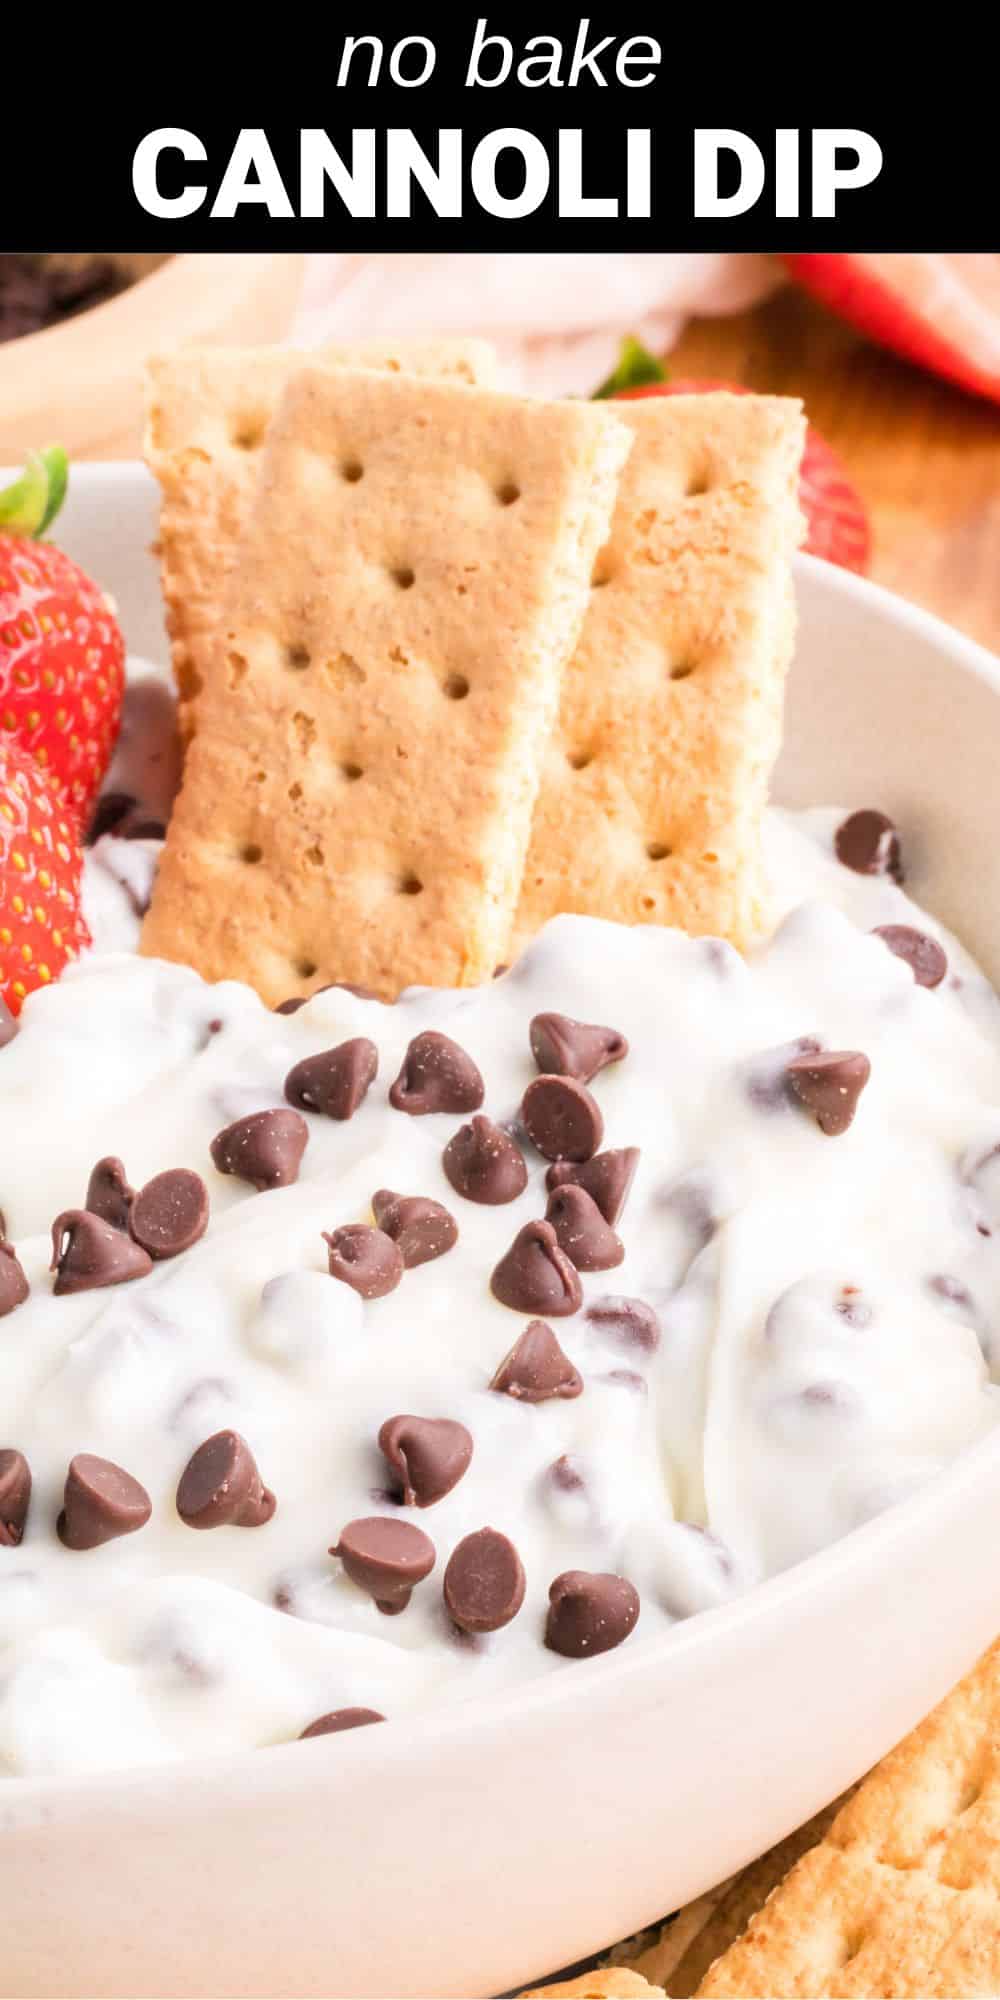  easy-to-make Cannoli Dip is a sweet and decadent treat that has everything you love about authentic cannoli, minus the shell. Rich and creamy and studded with mini chocolate chips, this dip is fabulous for any occasion.